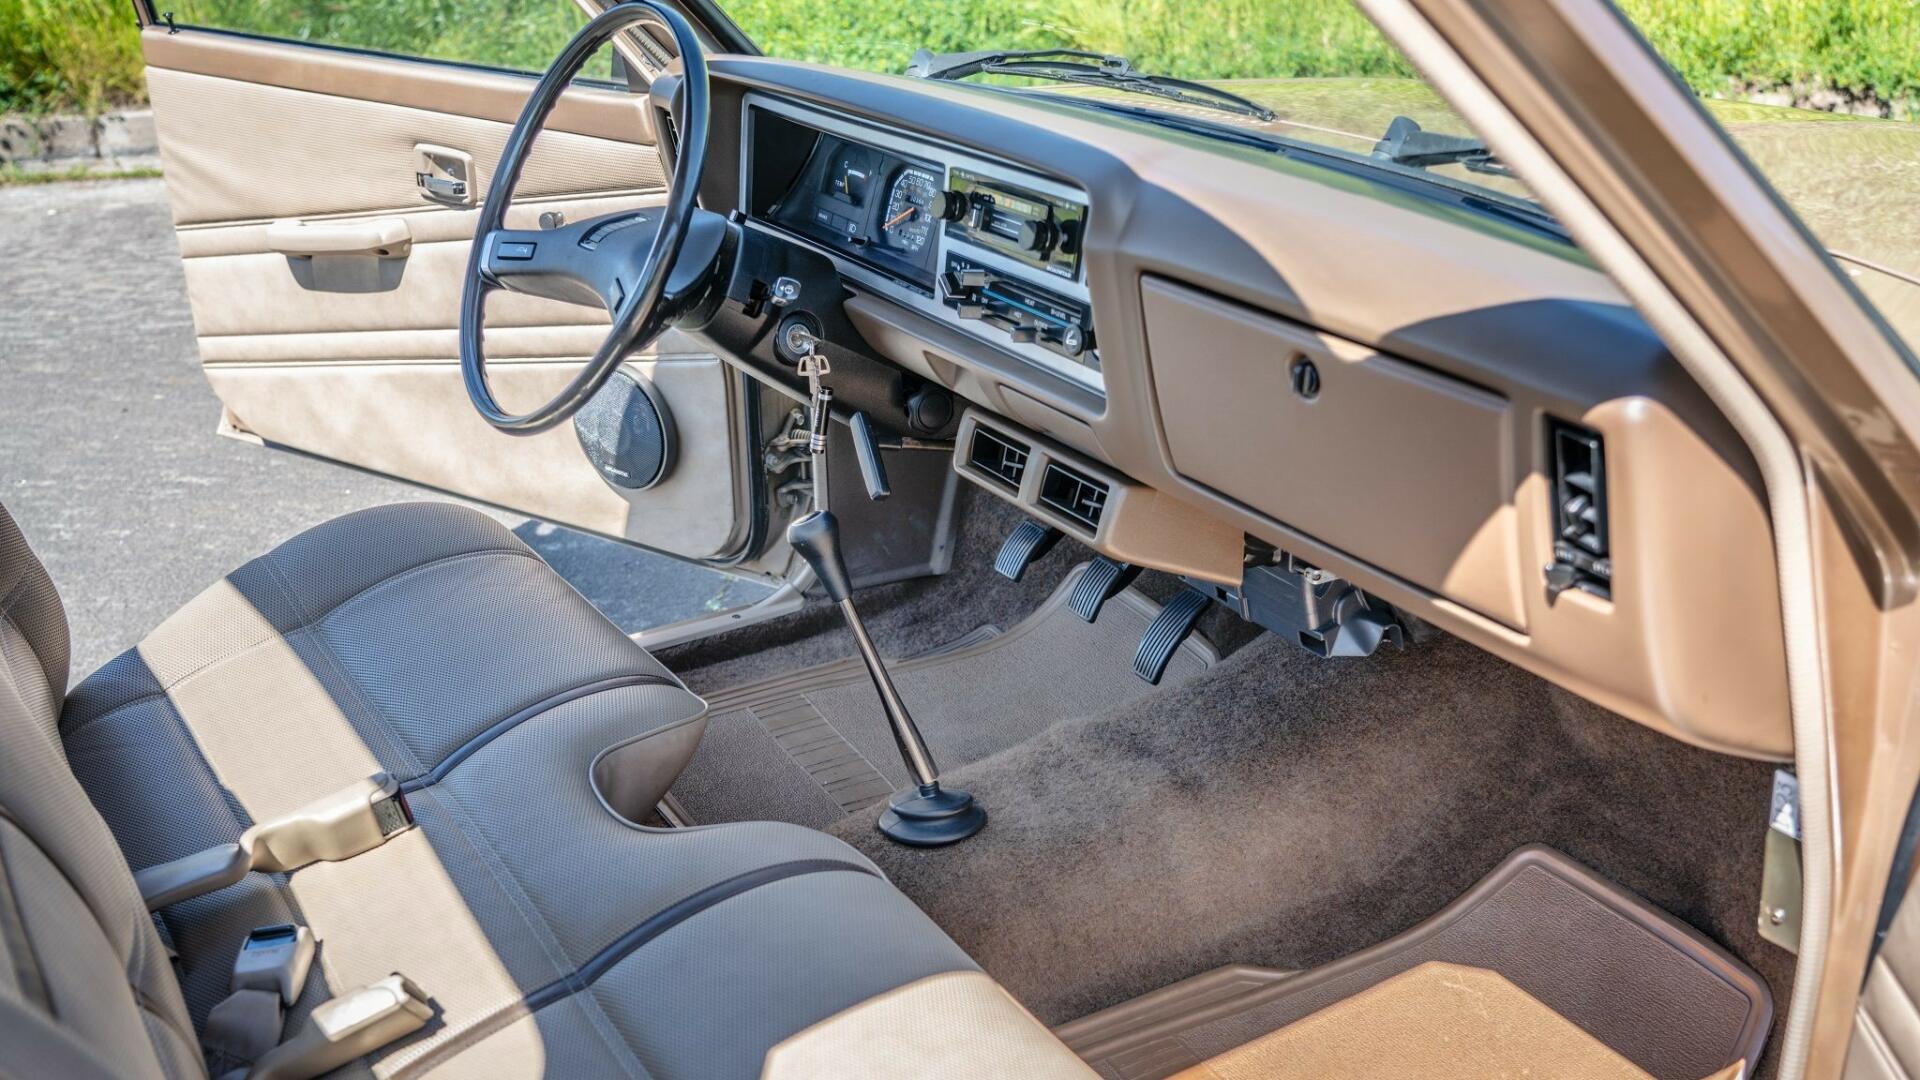 The Interior, Steering, Dashboard, And Central Console Of A 1985 Mitsubishi Mighty Max (Credits Bring a Trailer)